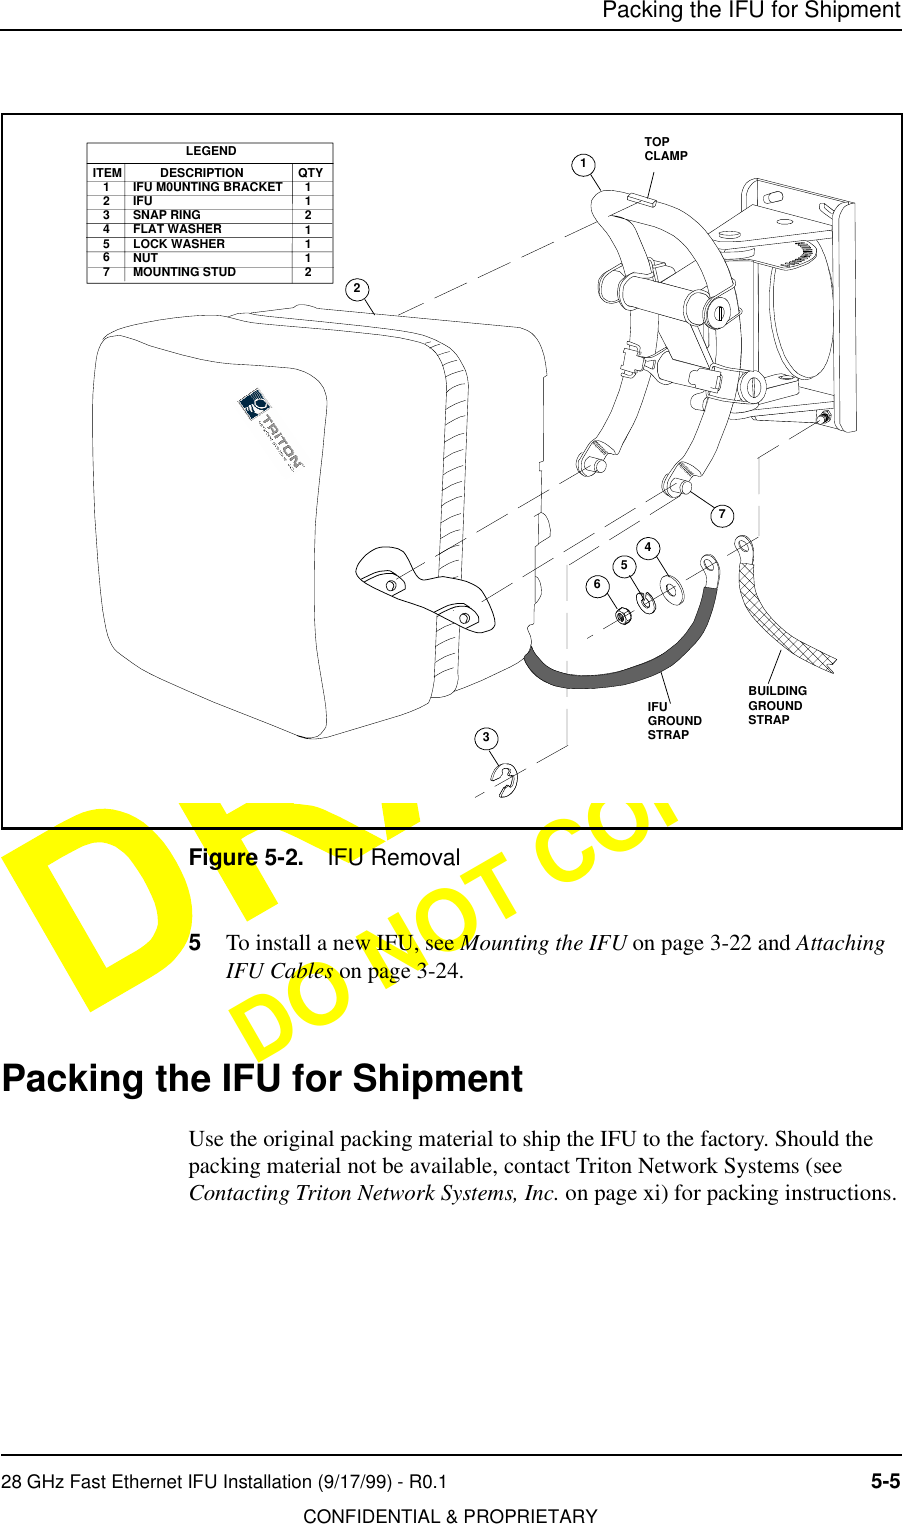 Packing the IFU for Shipment28 GHz Fast Ethernet IFU Installation (9/17/99) - R0.1 5-5CONFIDENTIAL &amp; PROPRIETARYDO NOT COPYFigure 5-2. IFU Removal5To install a new IFU, see Mounting the IFU on page 3-22 and Attaching IFU Cables on page 3-24.Packing the IFU for ShipmentUse the original packing material to ship the IFU to the factory. Should the packing material not be available, contact Triton Network Systems (see Contacting Triton Network Systems, Inc. on page xi) for packing instructions.345621LEGENDITEM   1   2   3   4   5   6   7           DESCRIPTIONIFU M0UNTING BRACKETIFUSNAP RINGFLAT WASHERLOCK WASHERNUTMOUNTING STUDQTY  1  1  2  1  1  1  2  IFU GROUNDSTRAP7BUILDINGGROUNDSTRAPTOPCLAMP